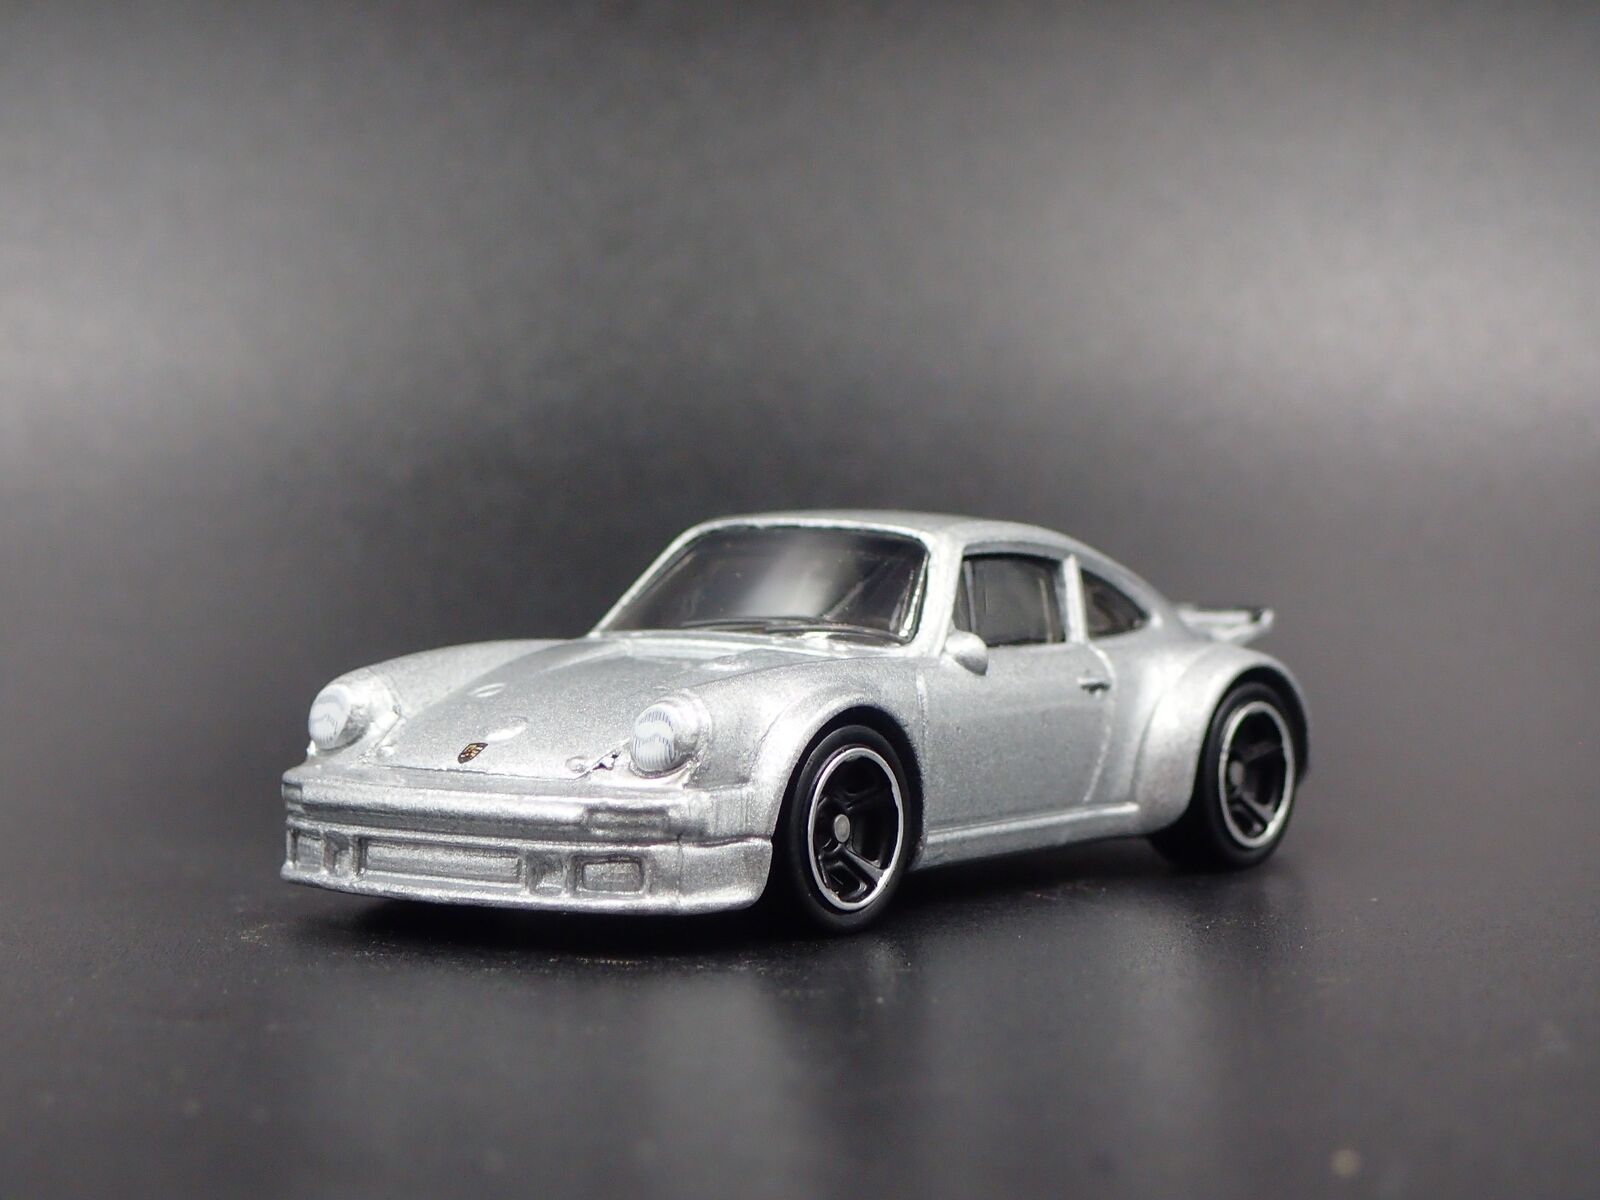 1976-1977 PORSCHE 934 TURBO RSR 1:64 SCALE COLLECTIBLE DIORAMA DIECAST relisted